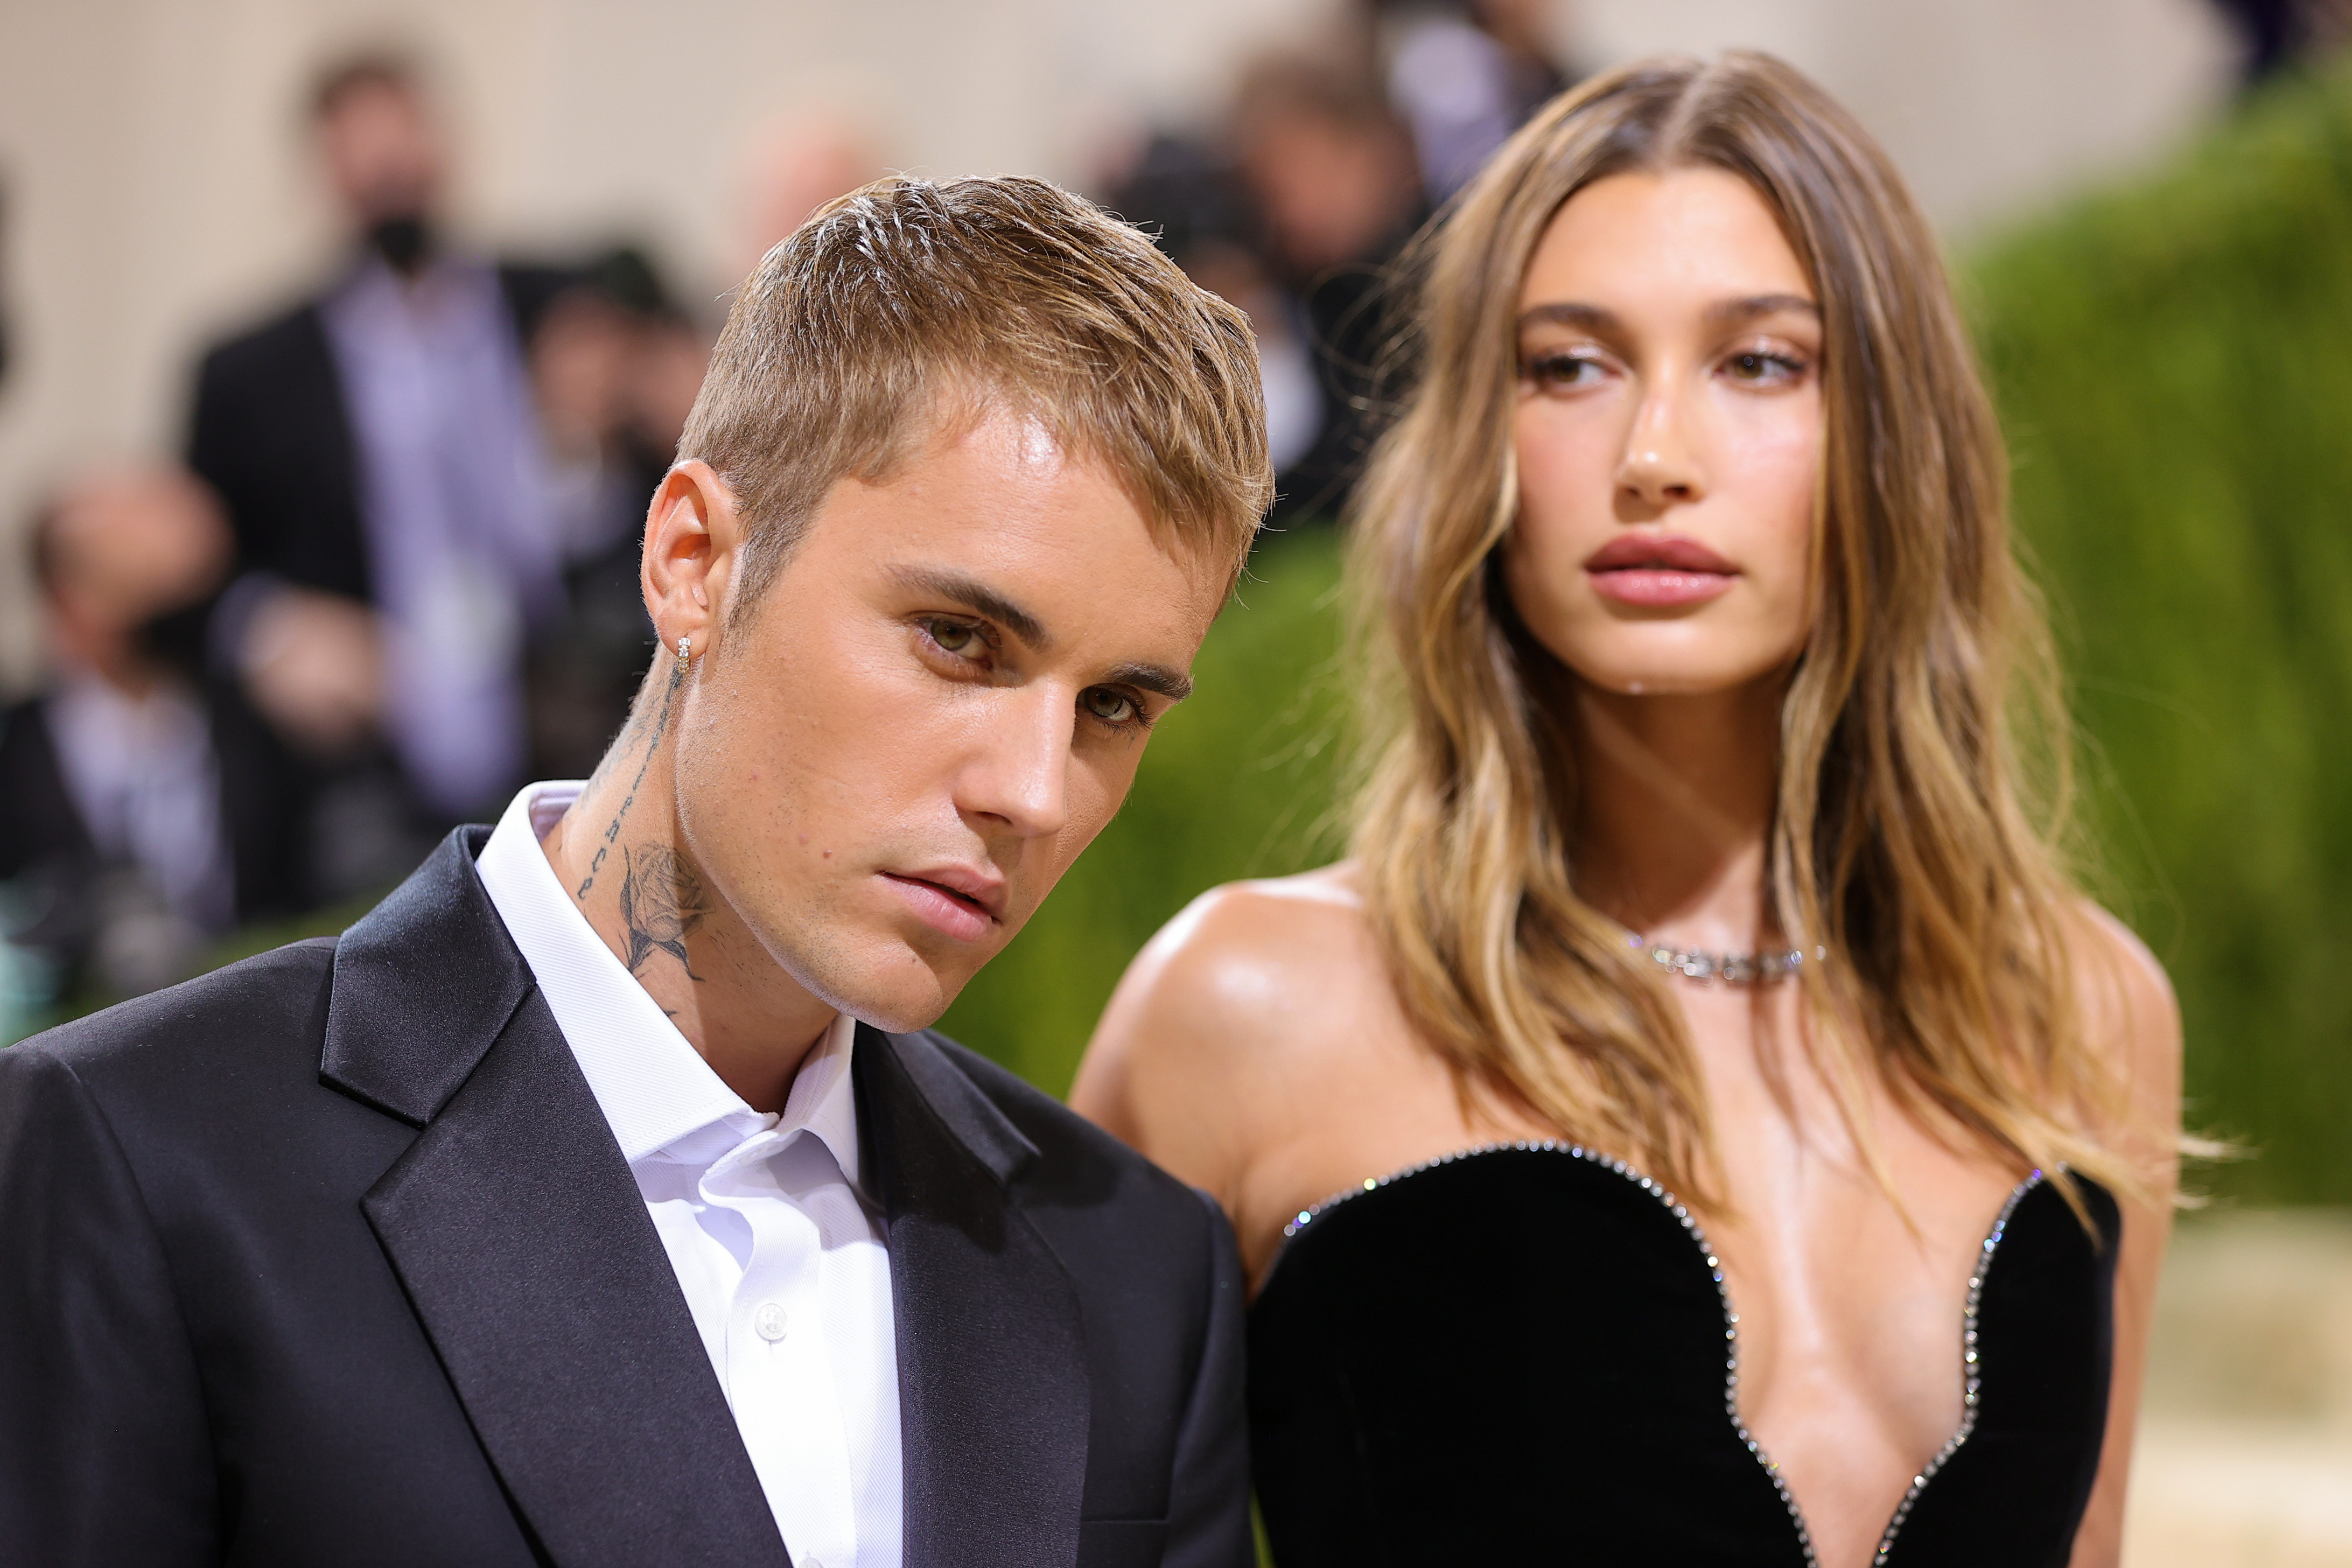 Hailey and Justin have been at the center of divorce speculation over the past few months